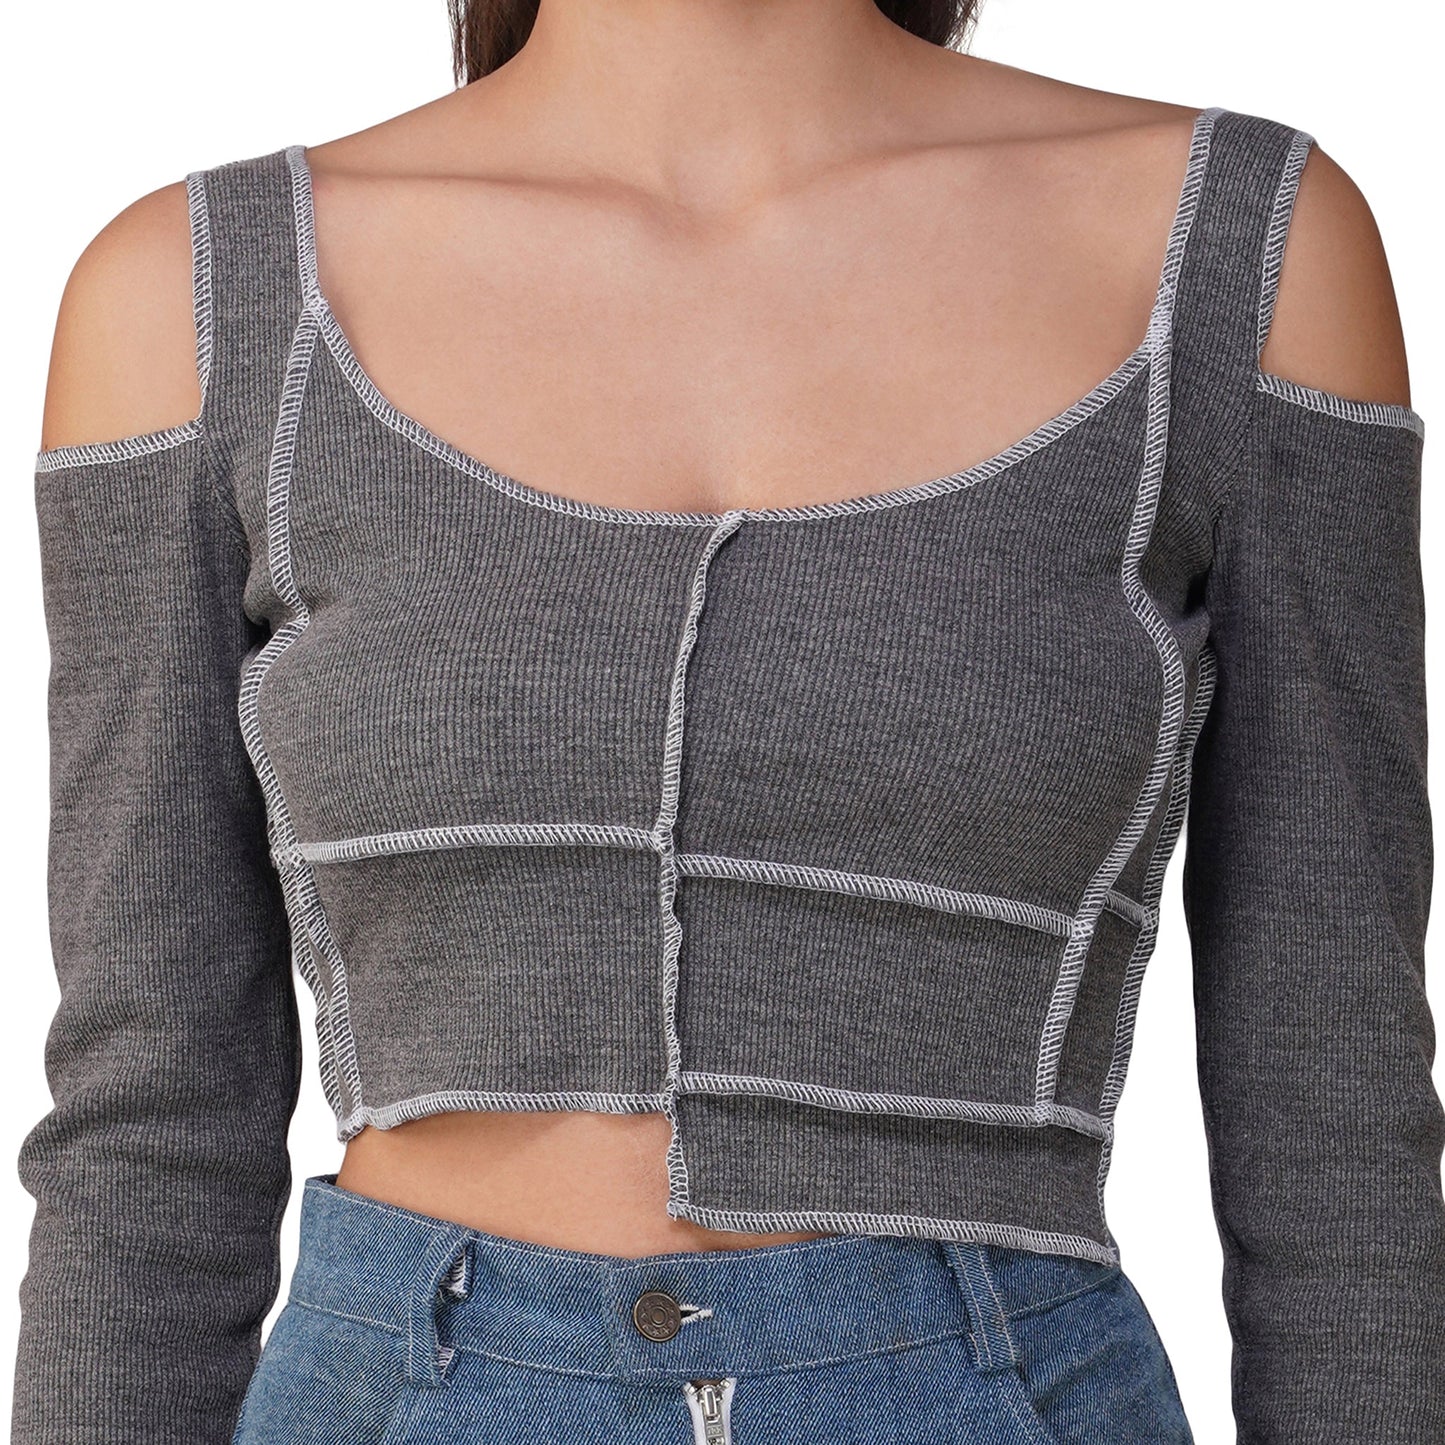 SLAY. Women's Contrast Stitch Grey Cold Shoulder Rib Full Sleeves Top & Jeans Co-ord Set